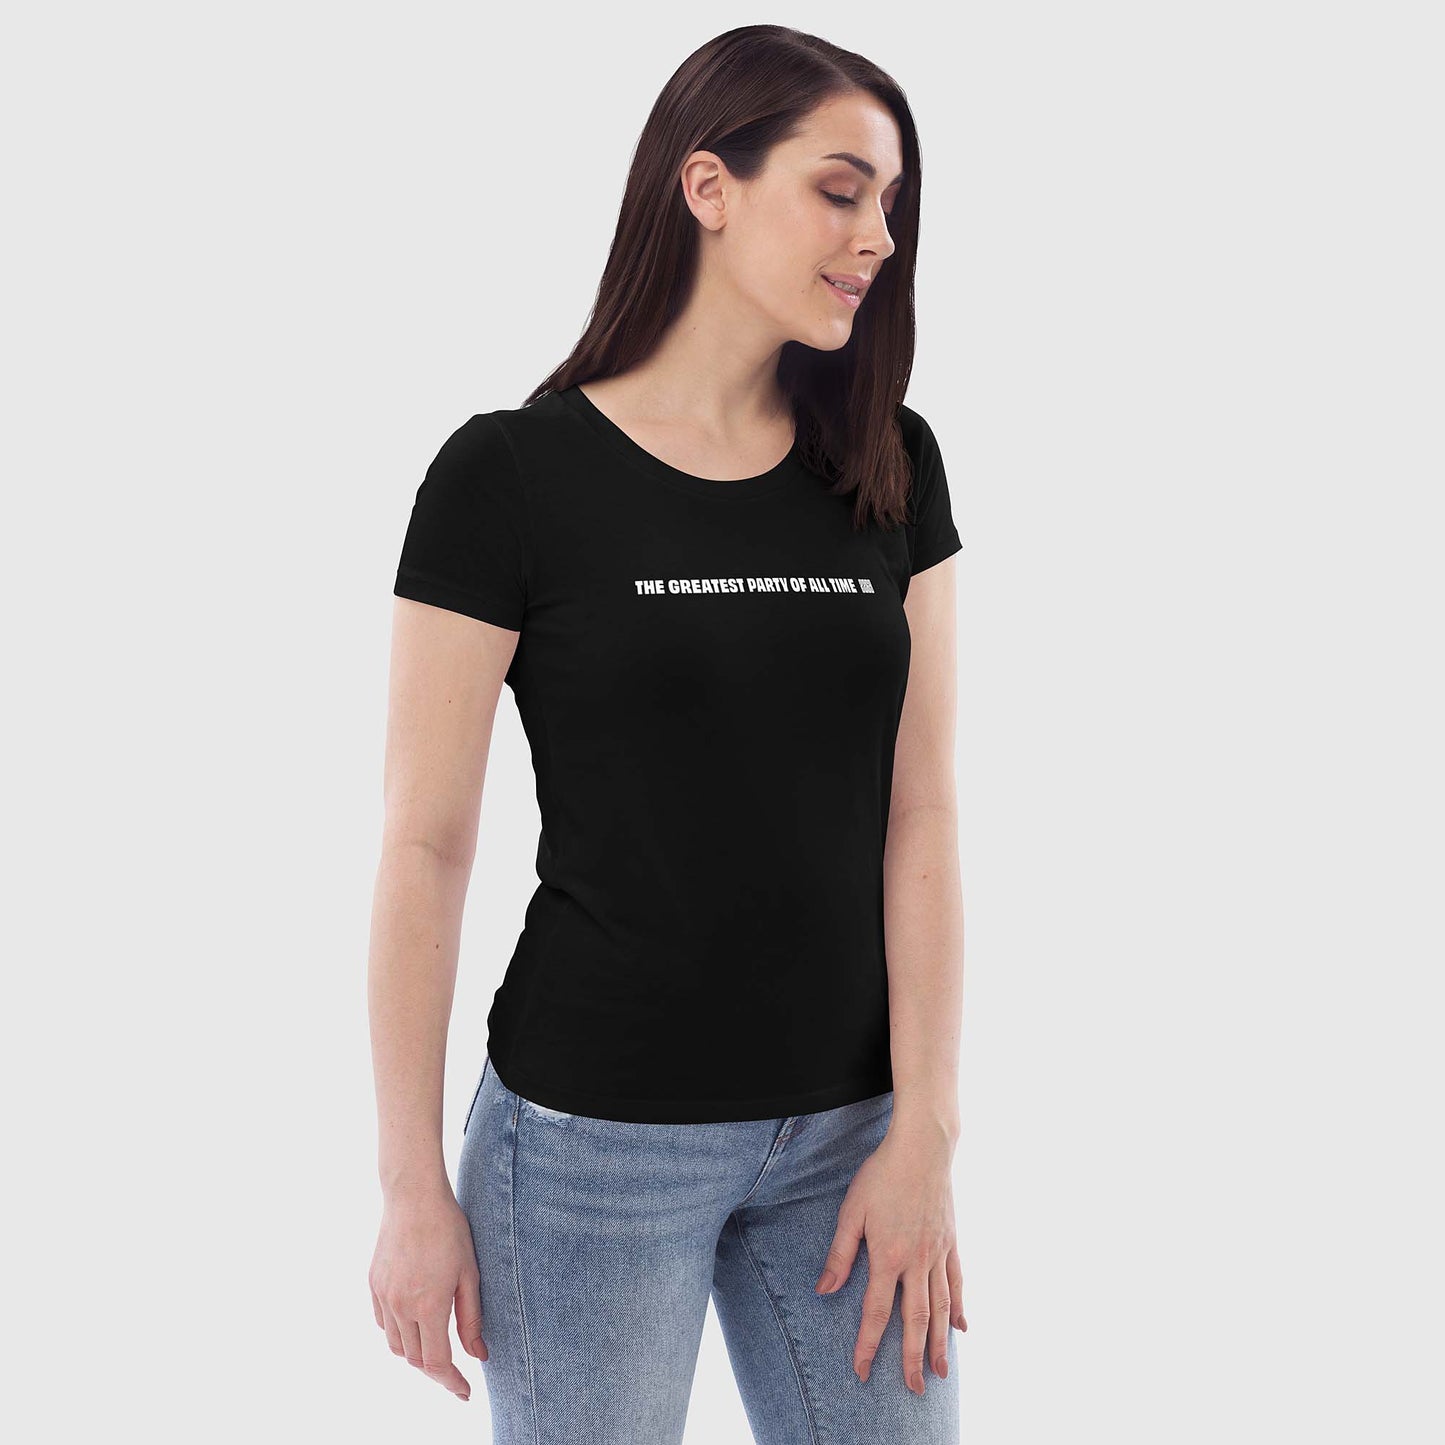 Women's black fitted organic cotton t-shirt with English 2269 party message